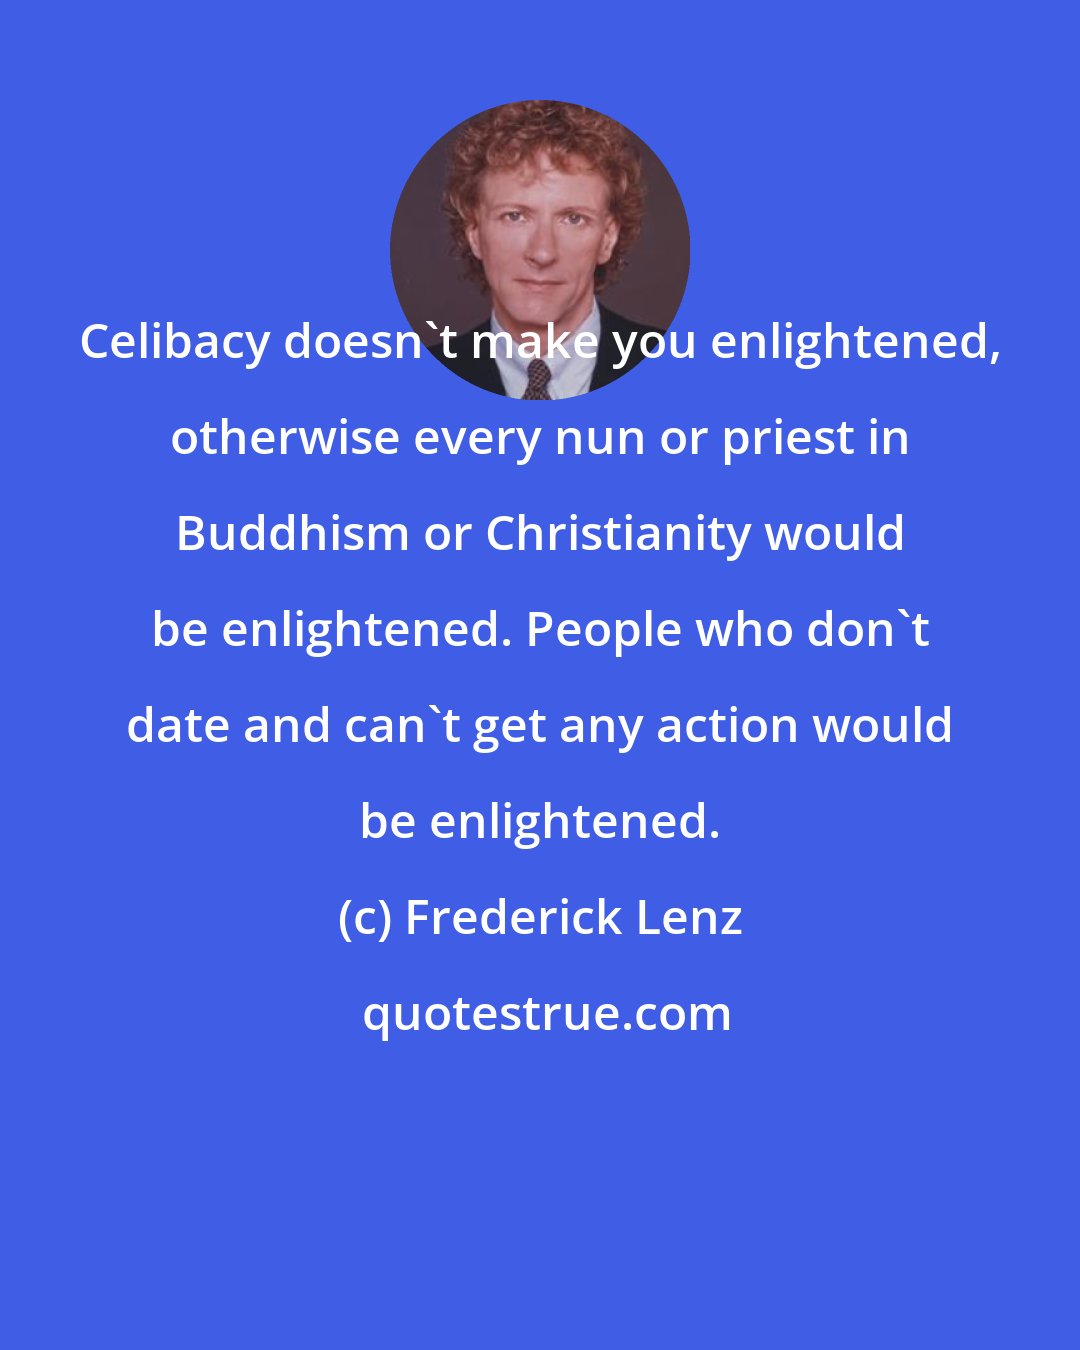 Frederick Lenz: Celibacy doesn't make you enlightened, otherwise every nun or priest in Buddhism or Christianity would be enlightened. People who don't date and can't get any action would be enlightened.